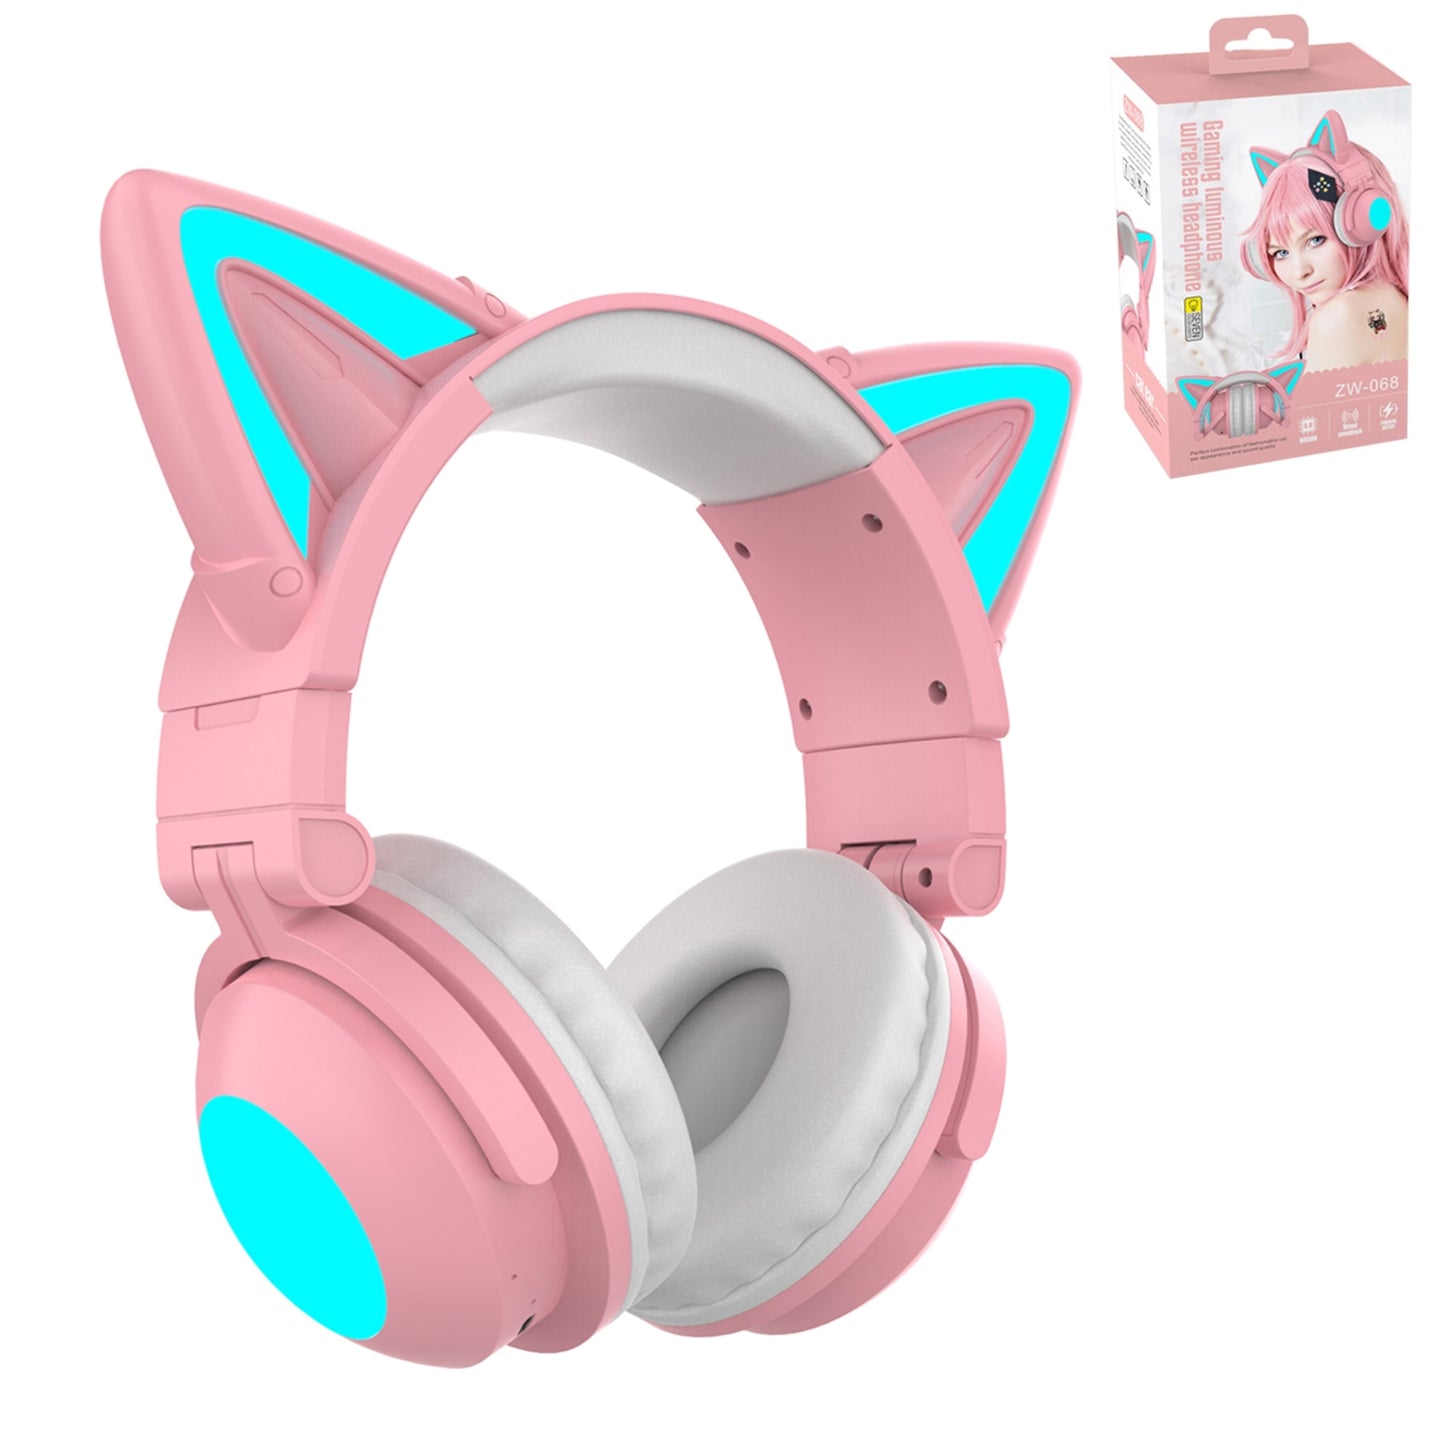 RGB Cute Cat Wireless Headphones with Microphone 7.1 Stereo Music